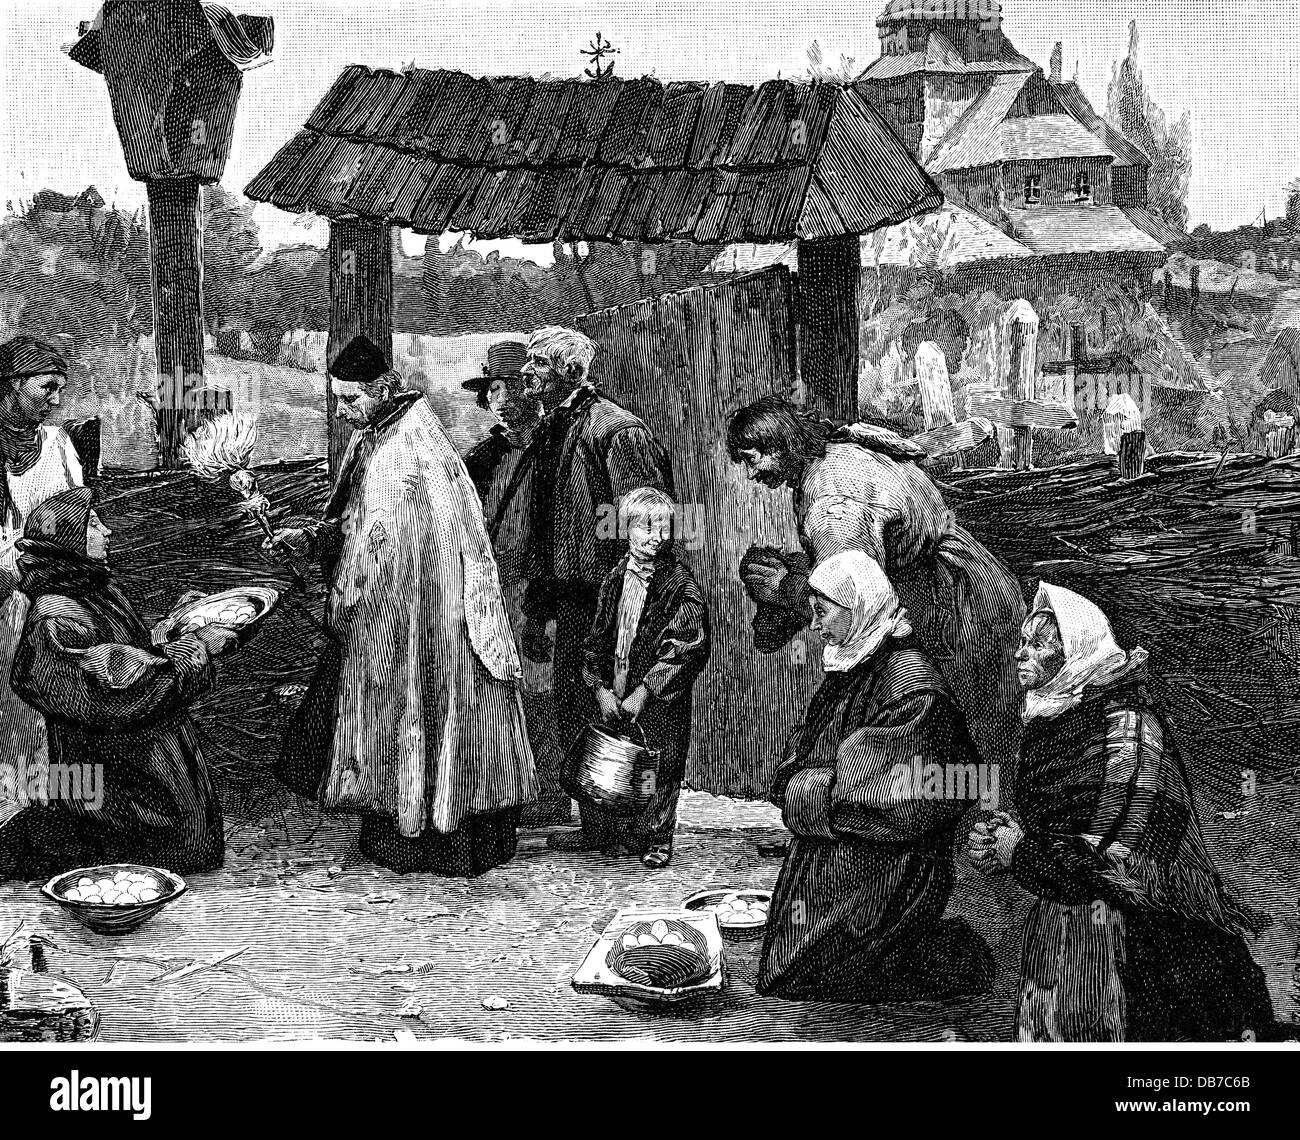 festivities, Easter, benediction of the Easter eggs near Chmelova, Eastern Galicia, after Teodor Axentowicz (1859 - 1938), wood engraving, circa 1900, Additional-Rights-Clearences-Not Available Stock Photo